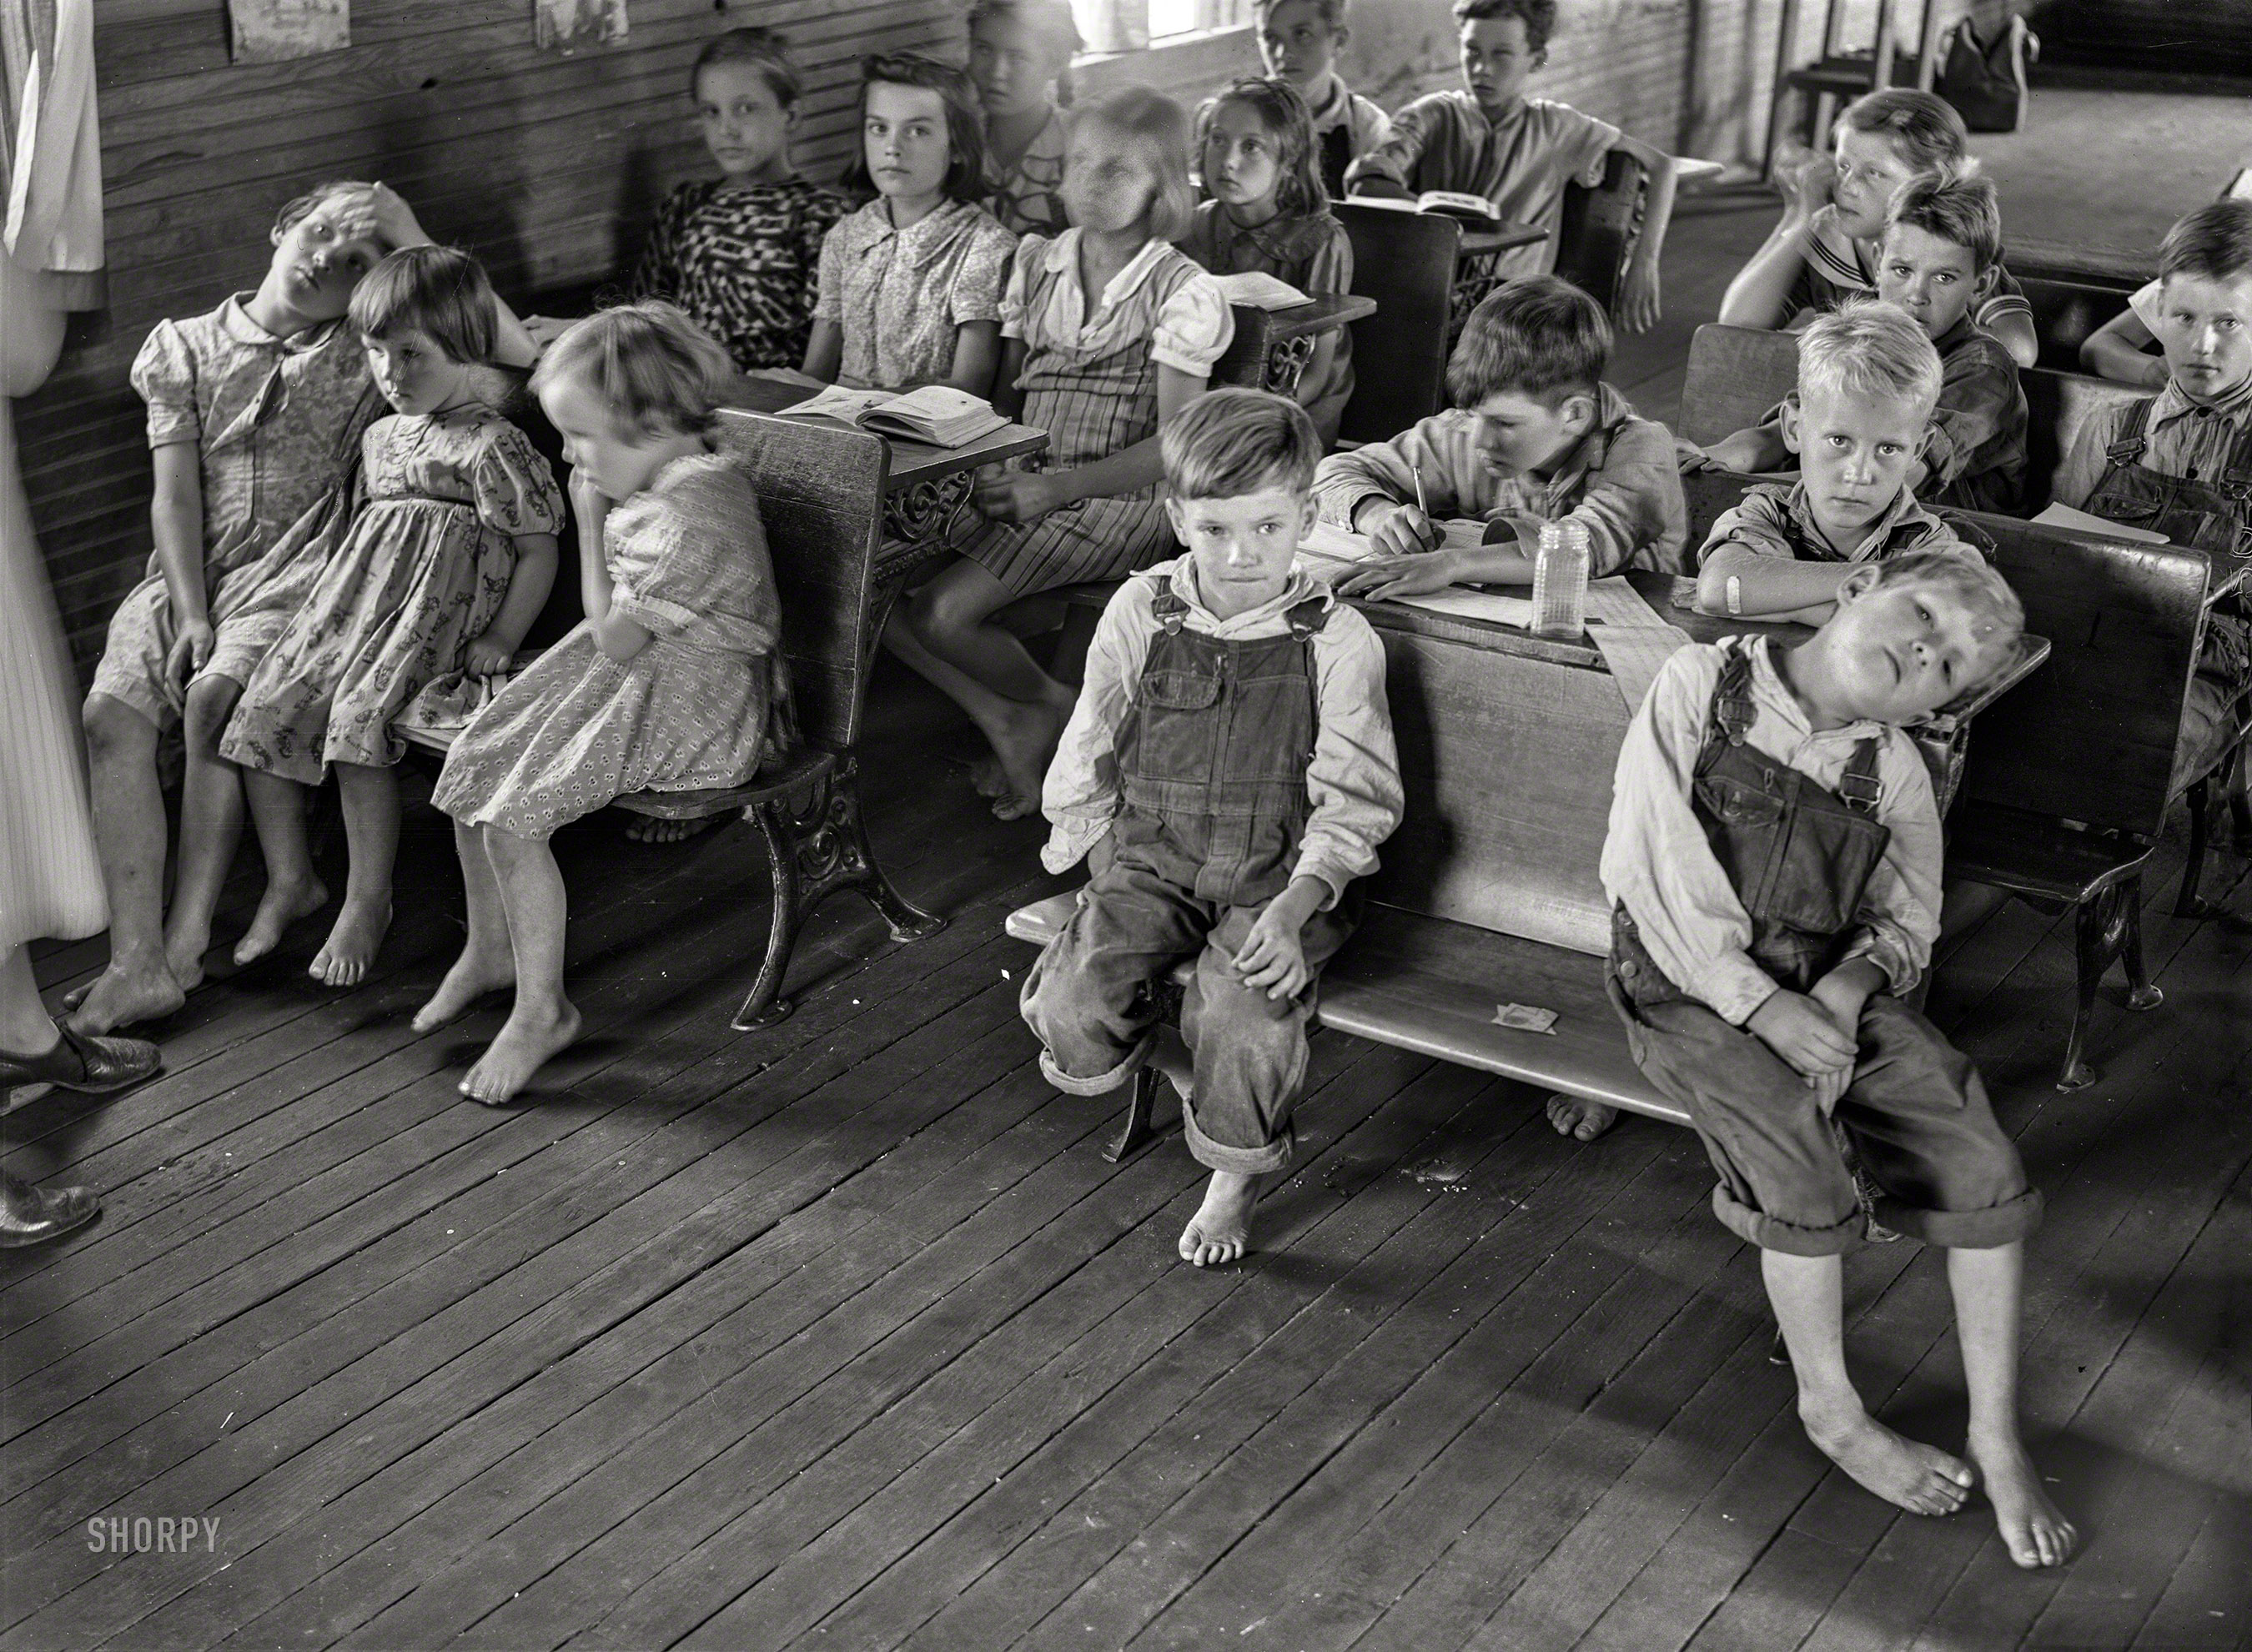 August 1940. "Overcrowded conditions and poor equipment in rural mountain school in Breathitt County, Kentucky. The school year begins in July and ends in January as most of the children have no shoes and insufficient clothing to walk the long distances over bad roads and up creek beds." Medium format negative by Marion Post Wolcott. View full size.